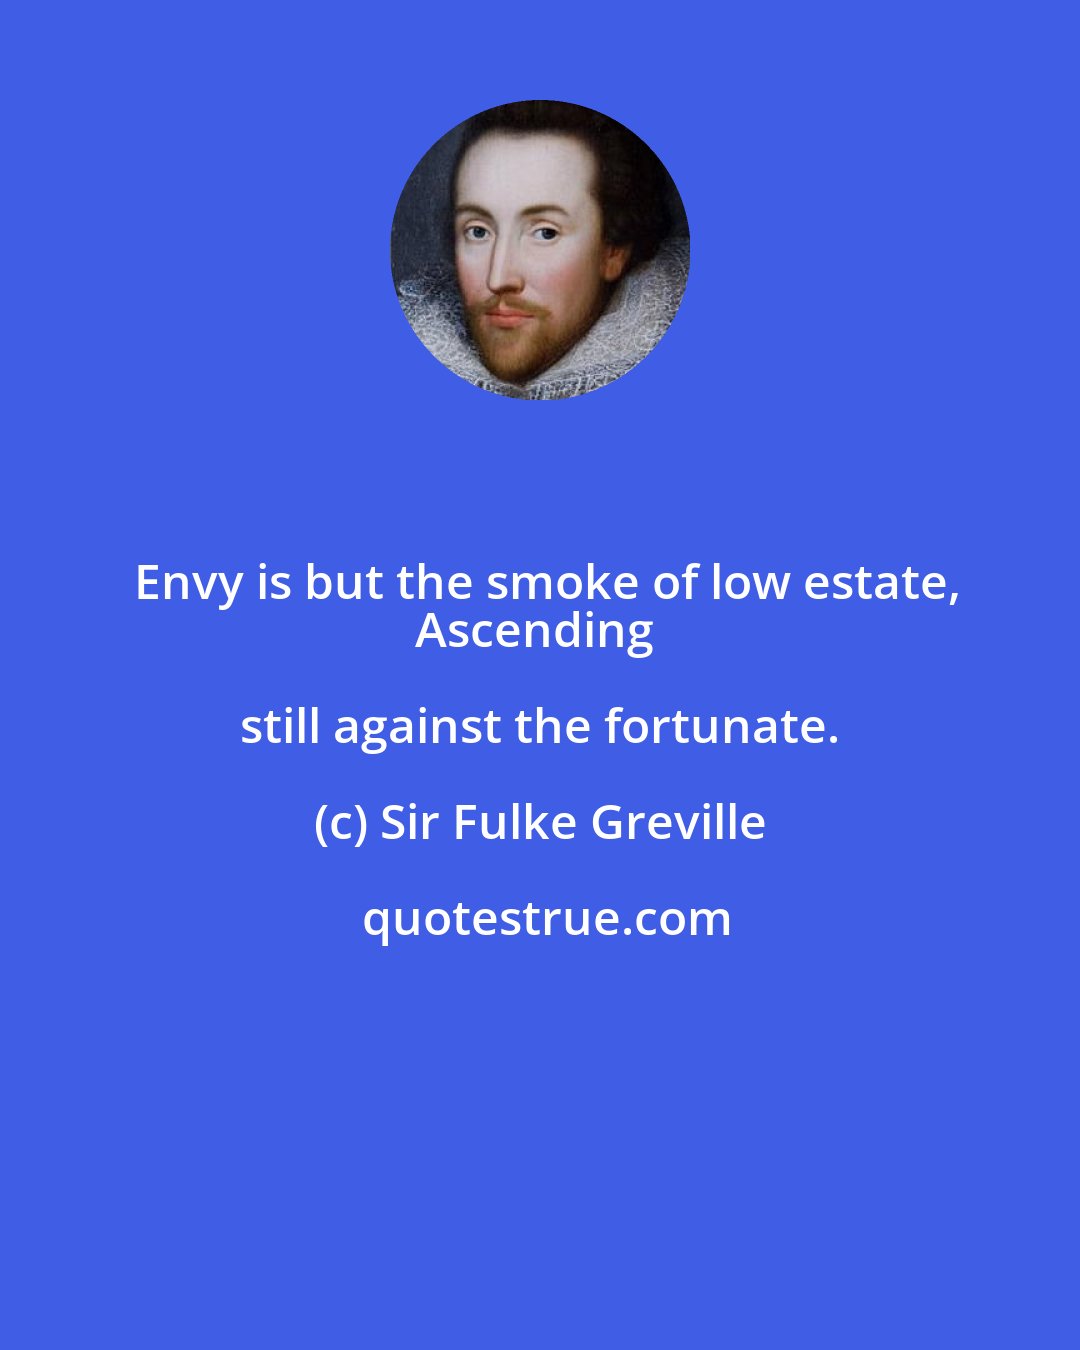 Sir Fulke Greville: Envy is but the smoke of low estate,
Ascending still against the fortunate.